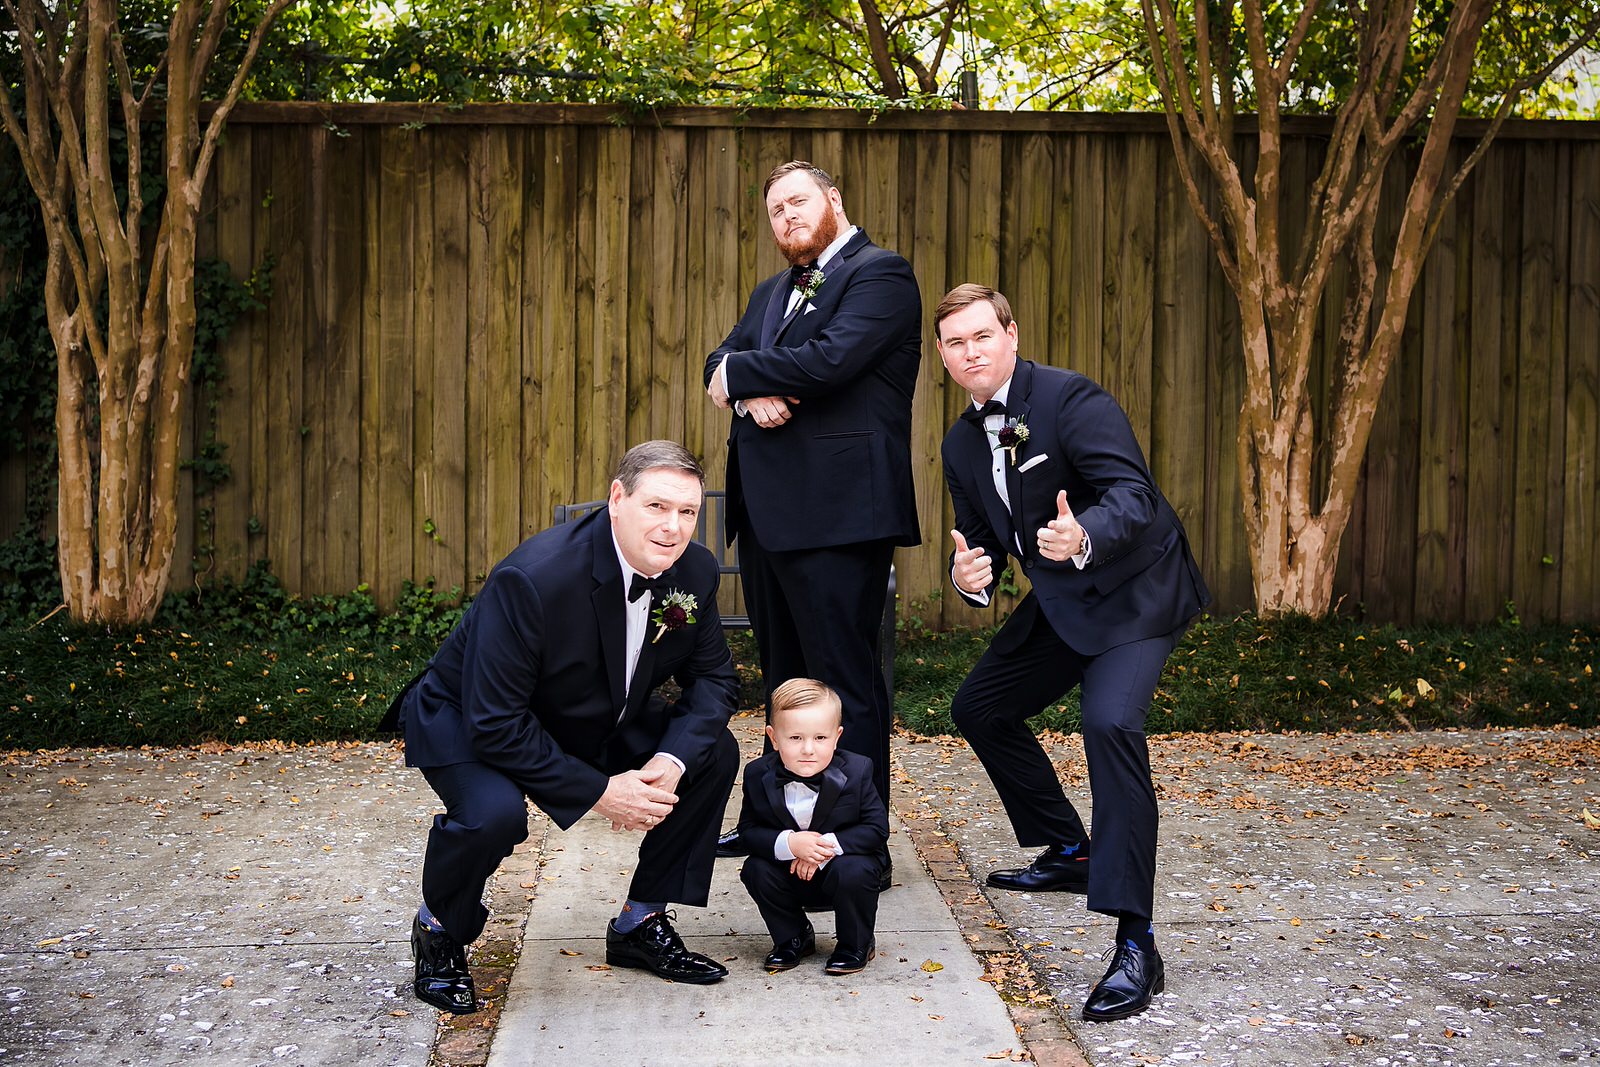 Groom and his family, including the ring bearer, strike funny poses